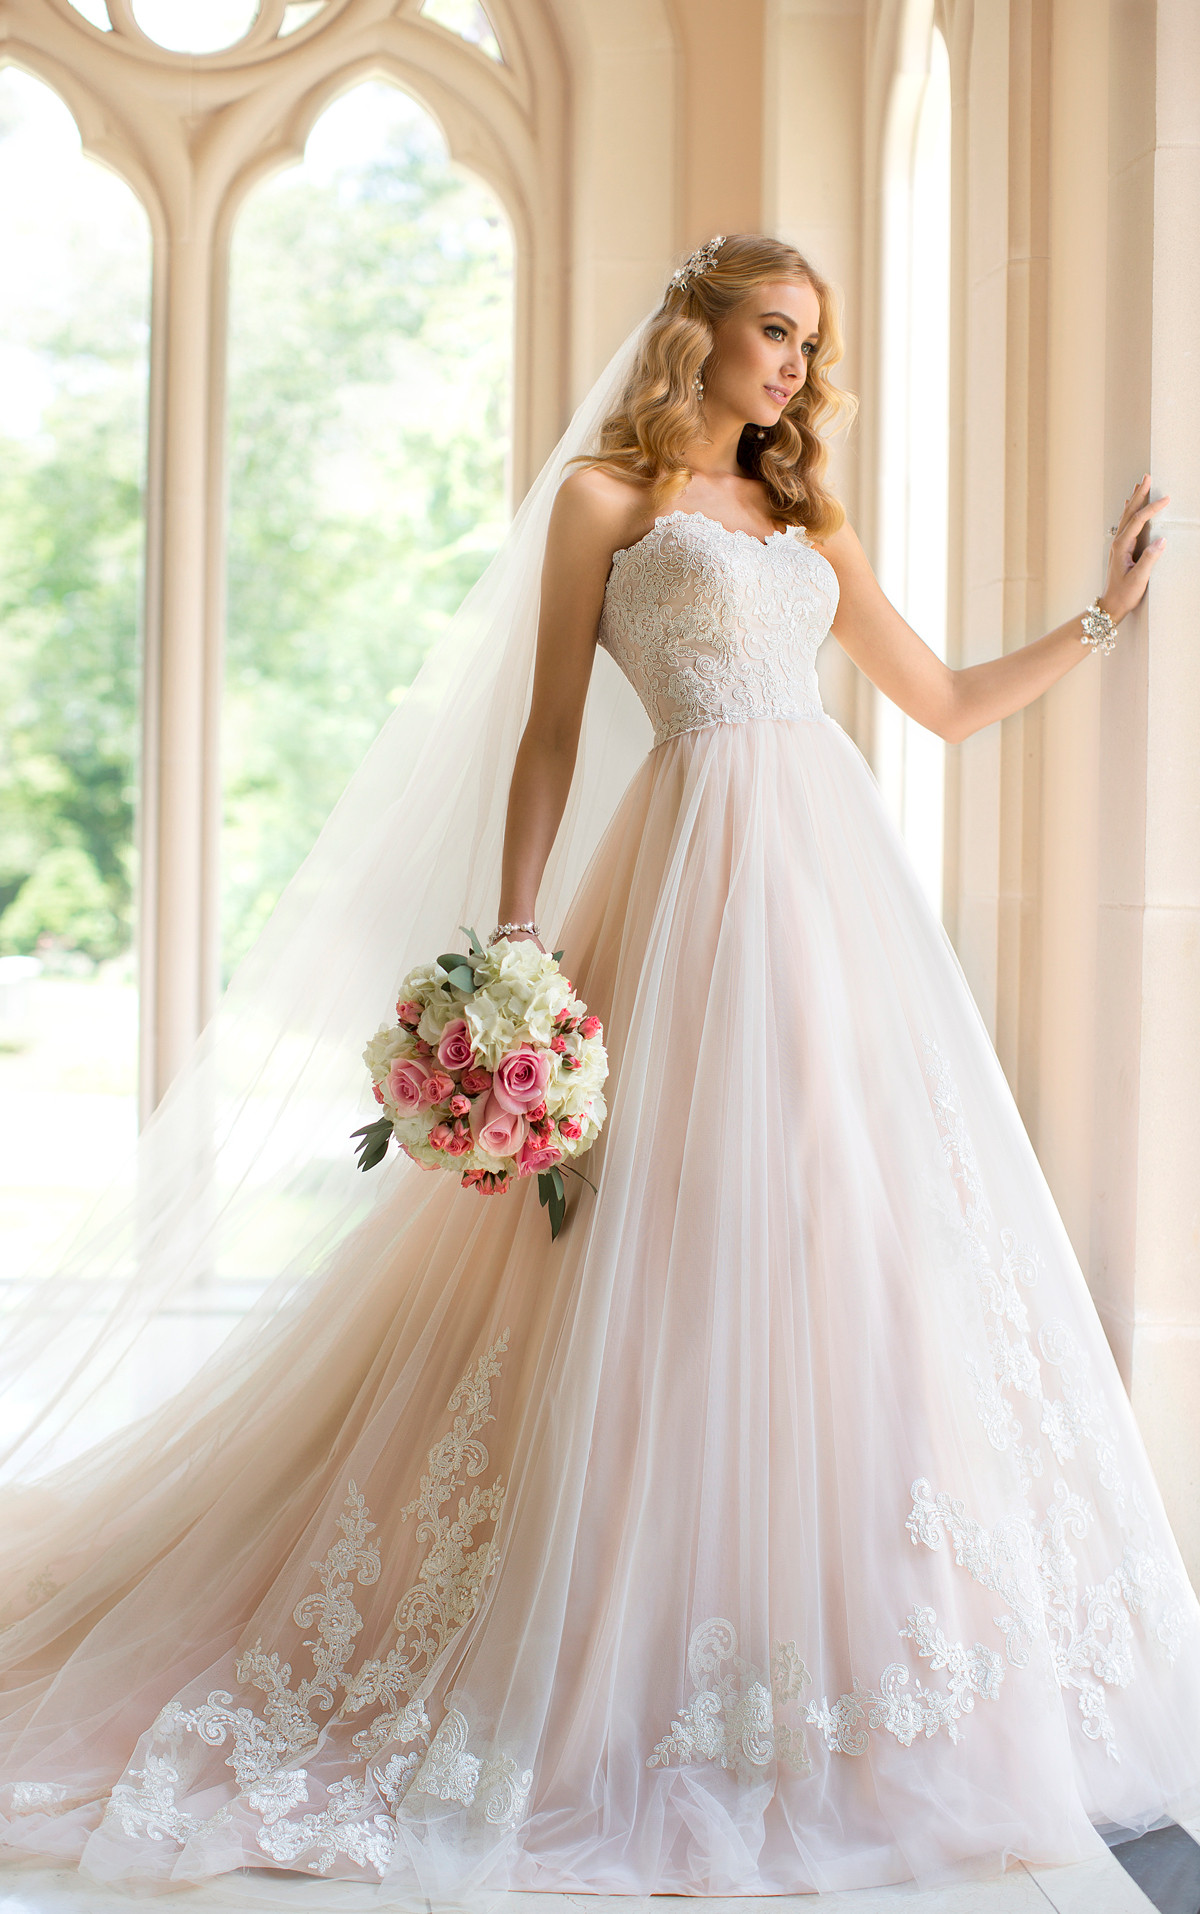 Wedding Dress Brands
 The Best Gowns from The Most In Demand Wedding Dress